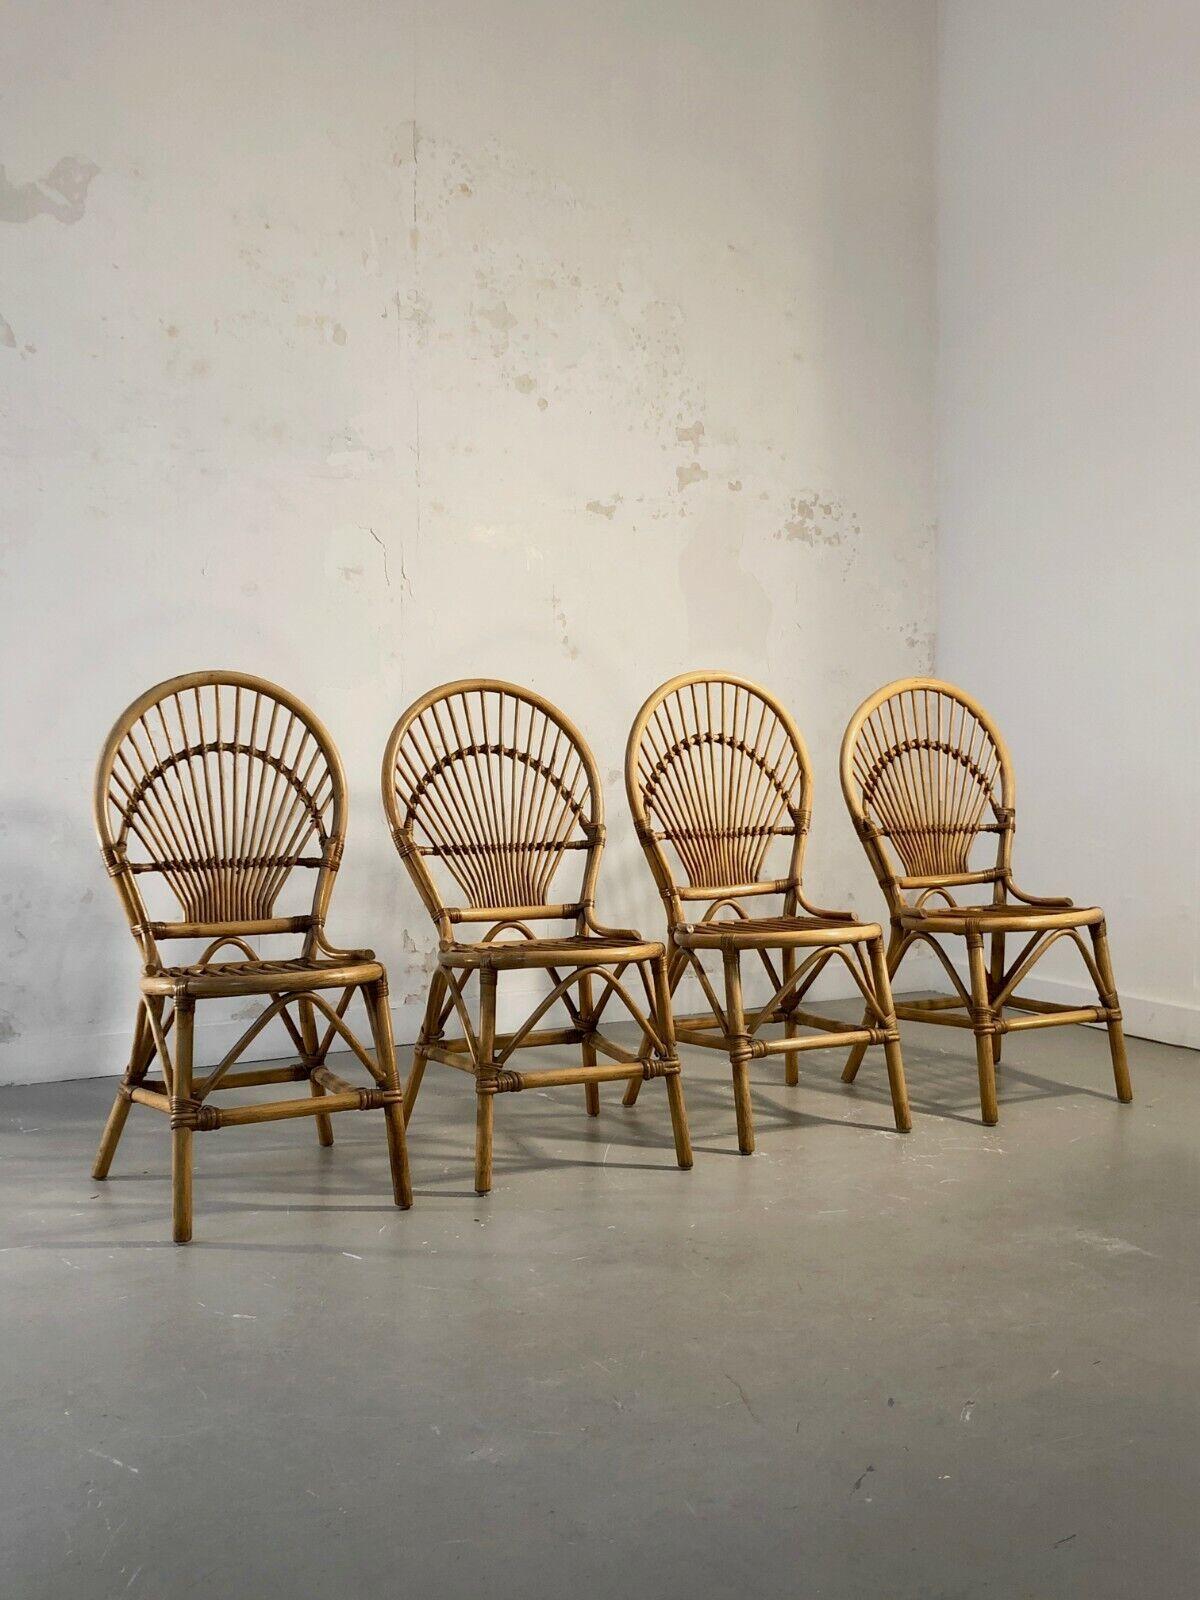 Bamboo A Set of 4 SHABBY-CHIC BAMBOO Chairs in AUDOUX-MINNET Style, France 1970 For Sale